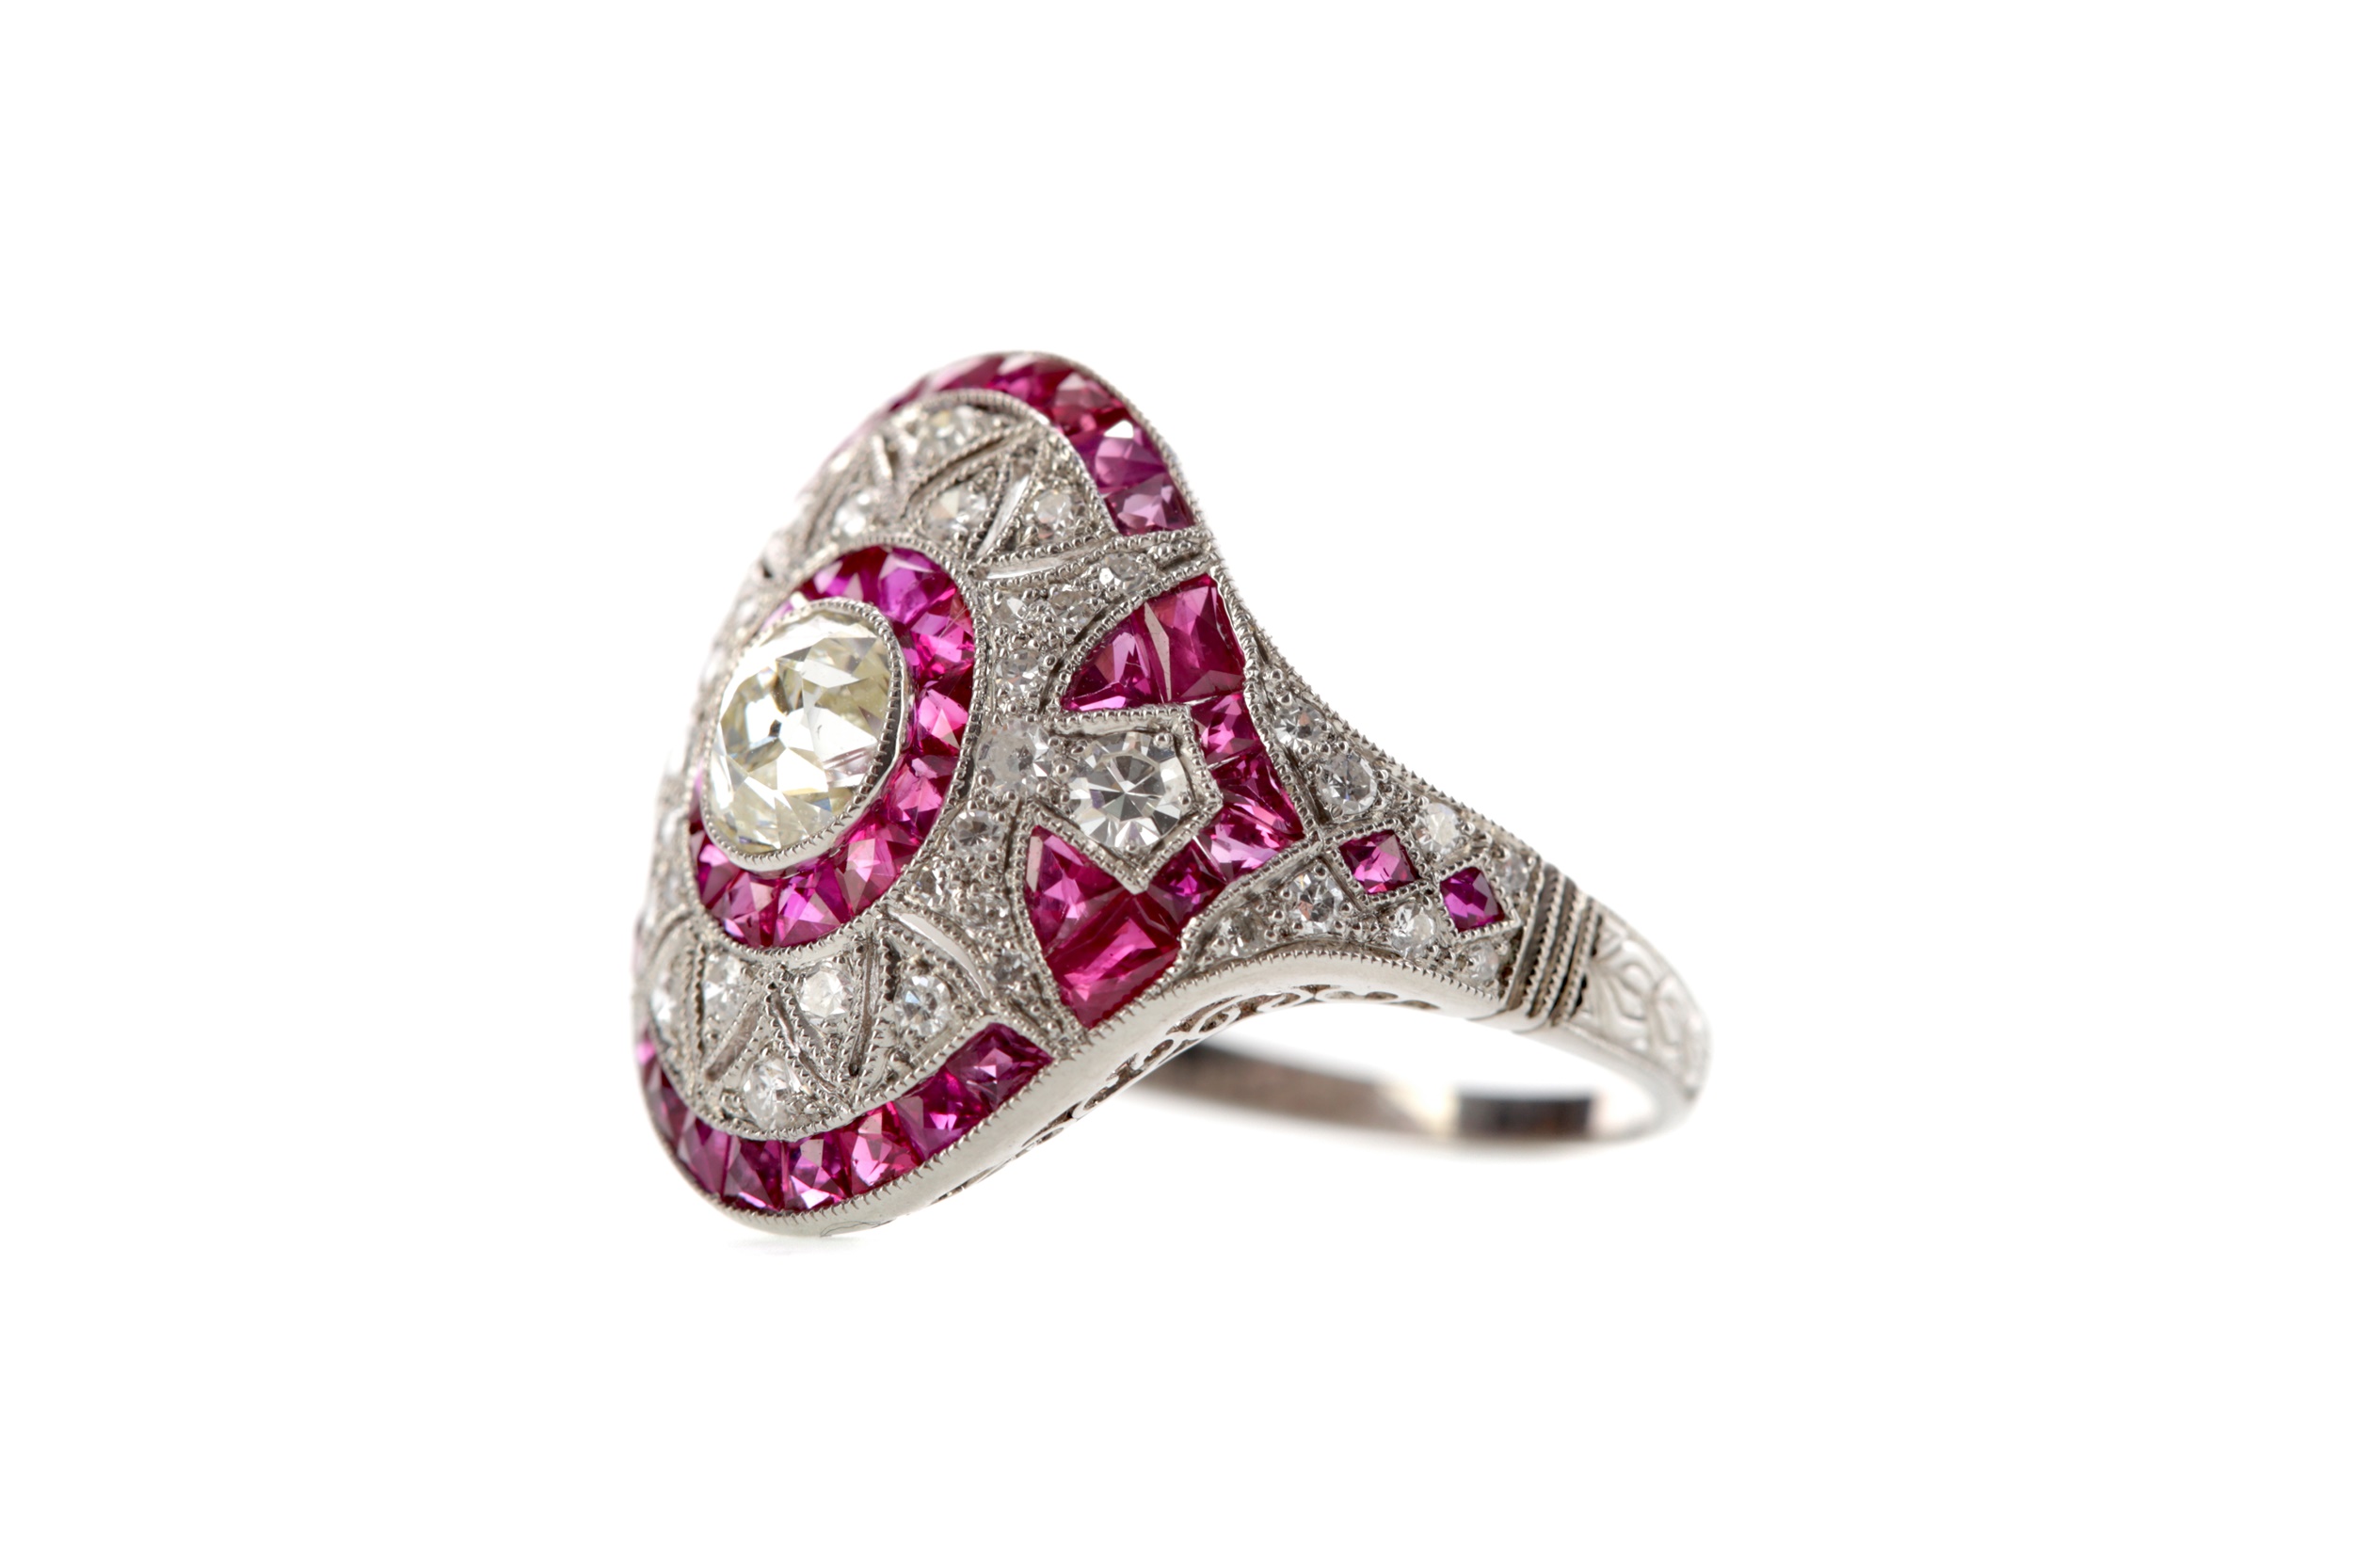 A RUBY, SPINEL AND DIAMOND RING - Image 2 of 2